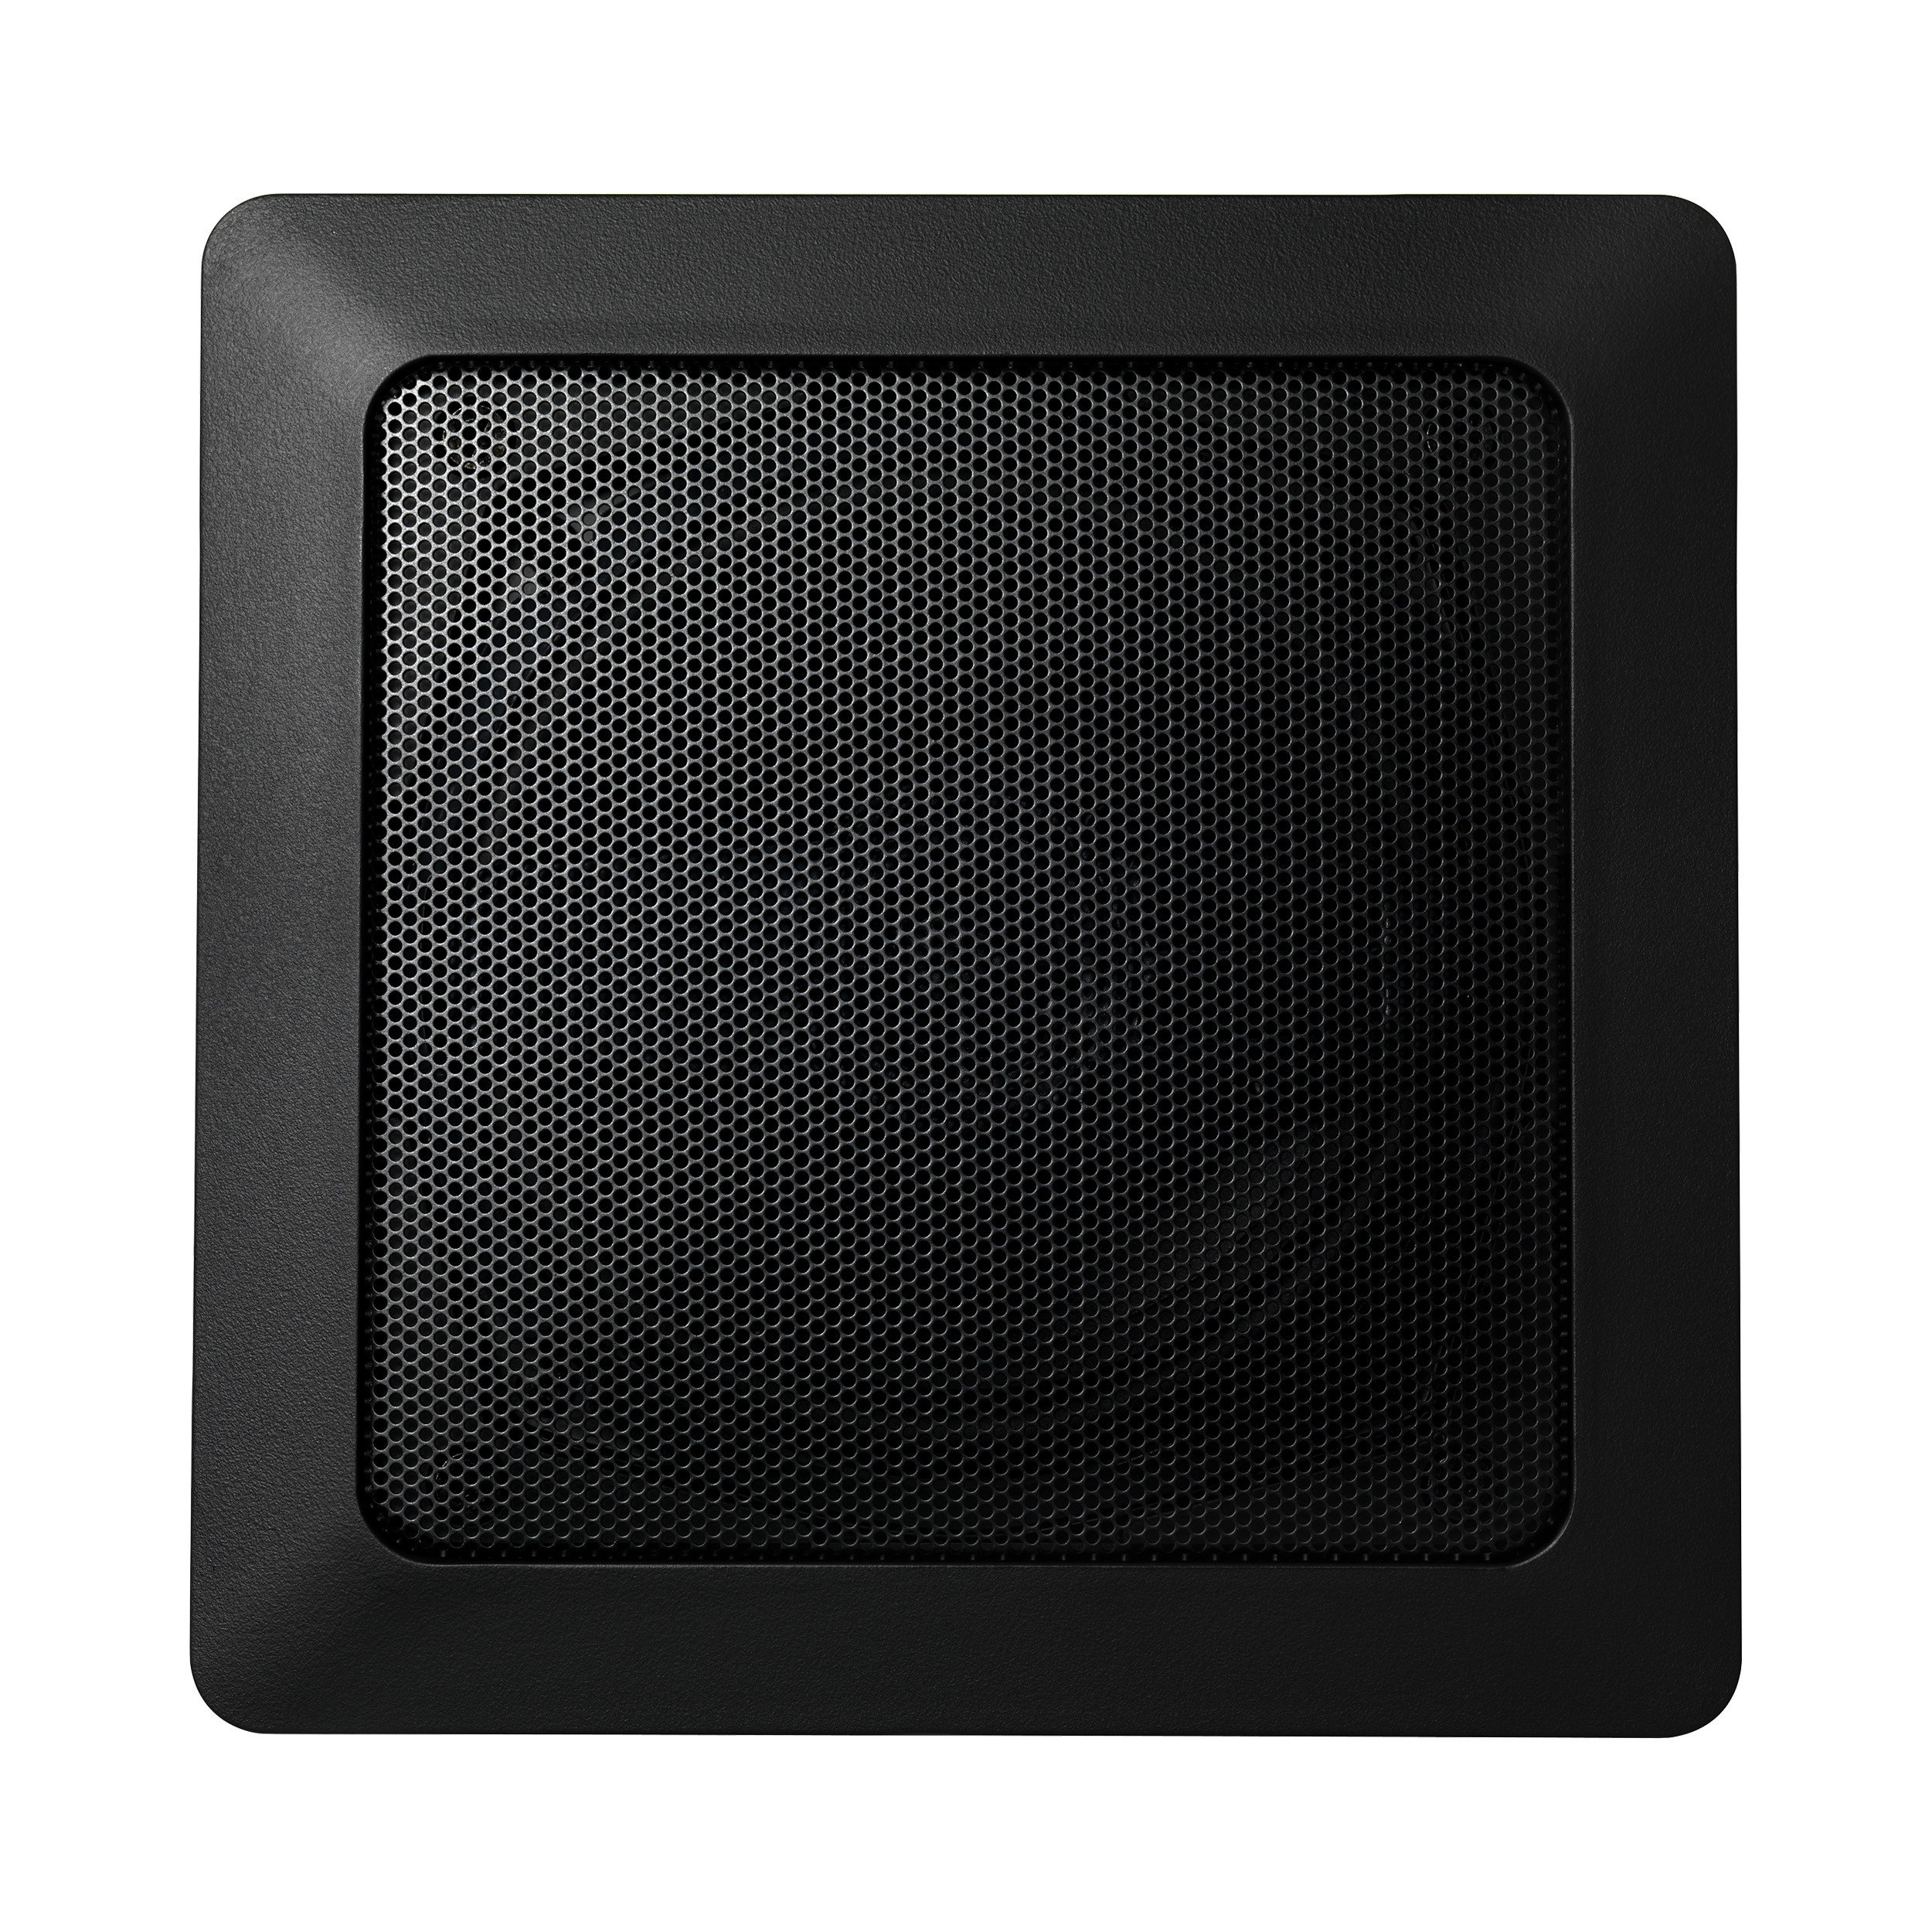 Mr Steam MSSPEAKERSSQ-BK MusicTherapy Square Audio Speakers With Powerful Bass In Black